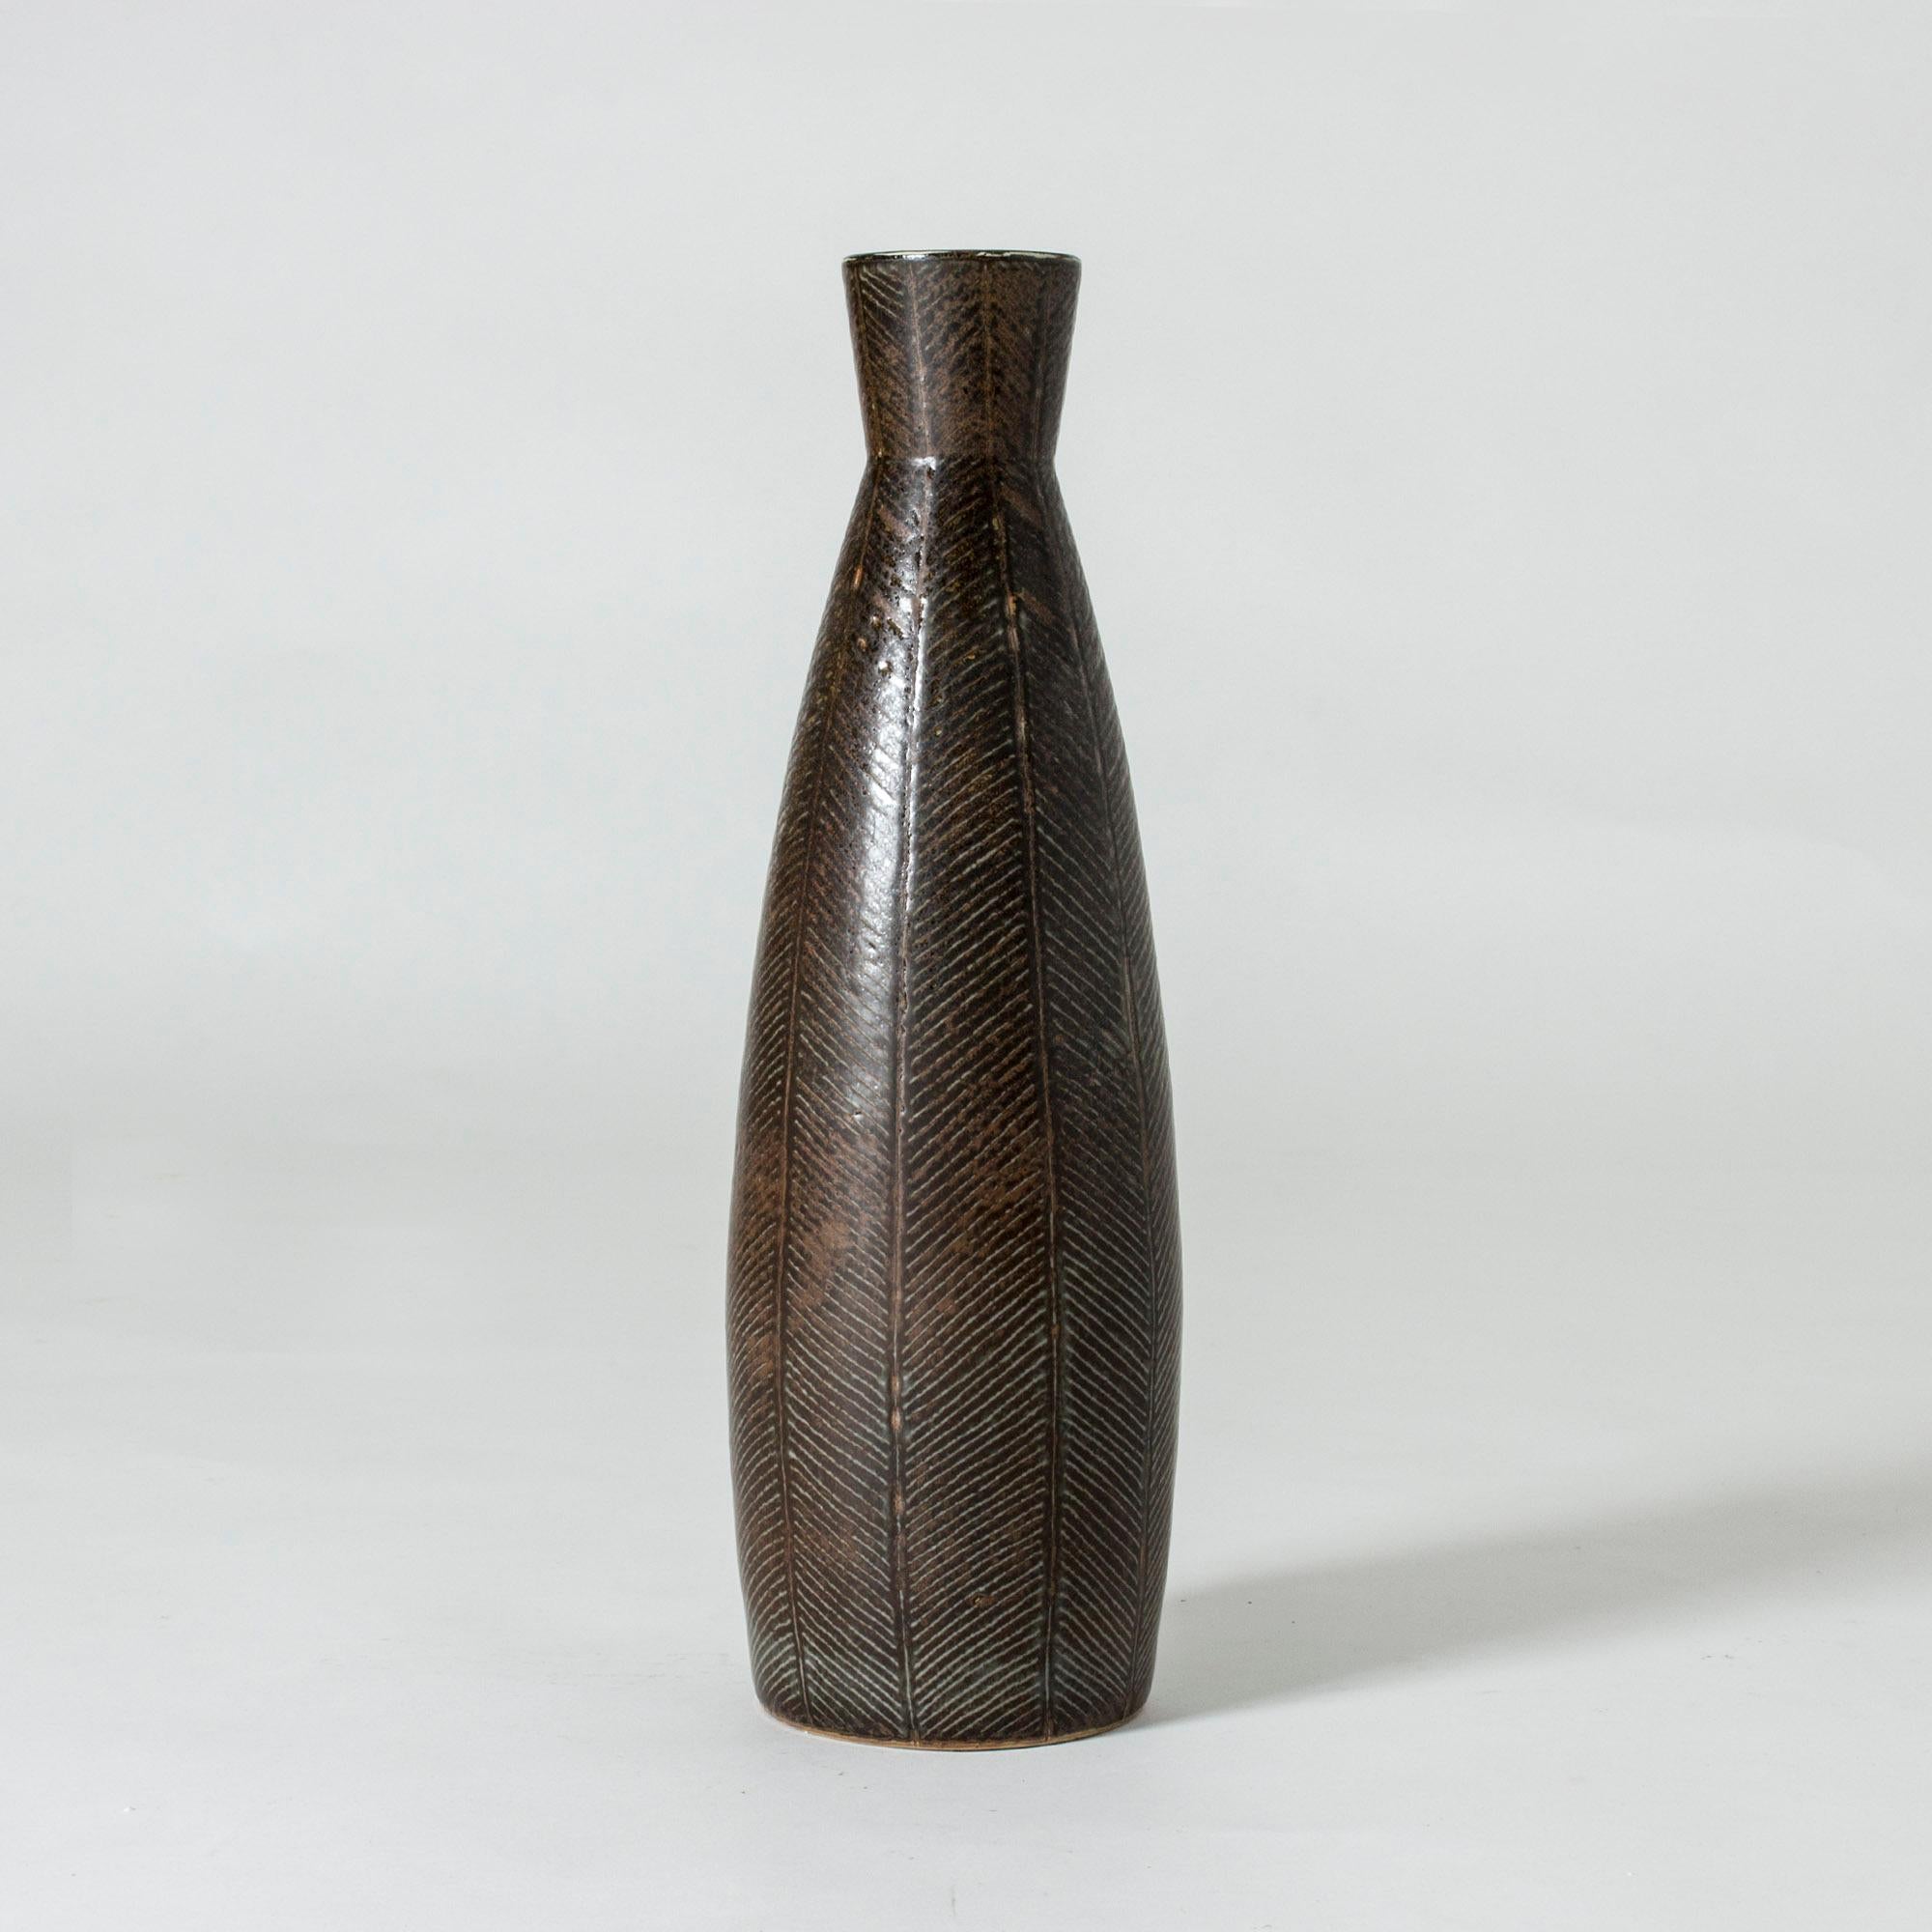 Unique floor vase by Carl-Harry Stålhane, made in chamotte stoneware with a dark brown glaze. A fishbone like pattern is etched onto the body, light colored semi translucent glaze is caught in the stripes.